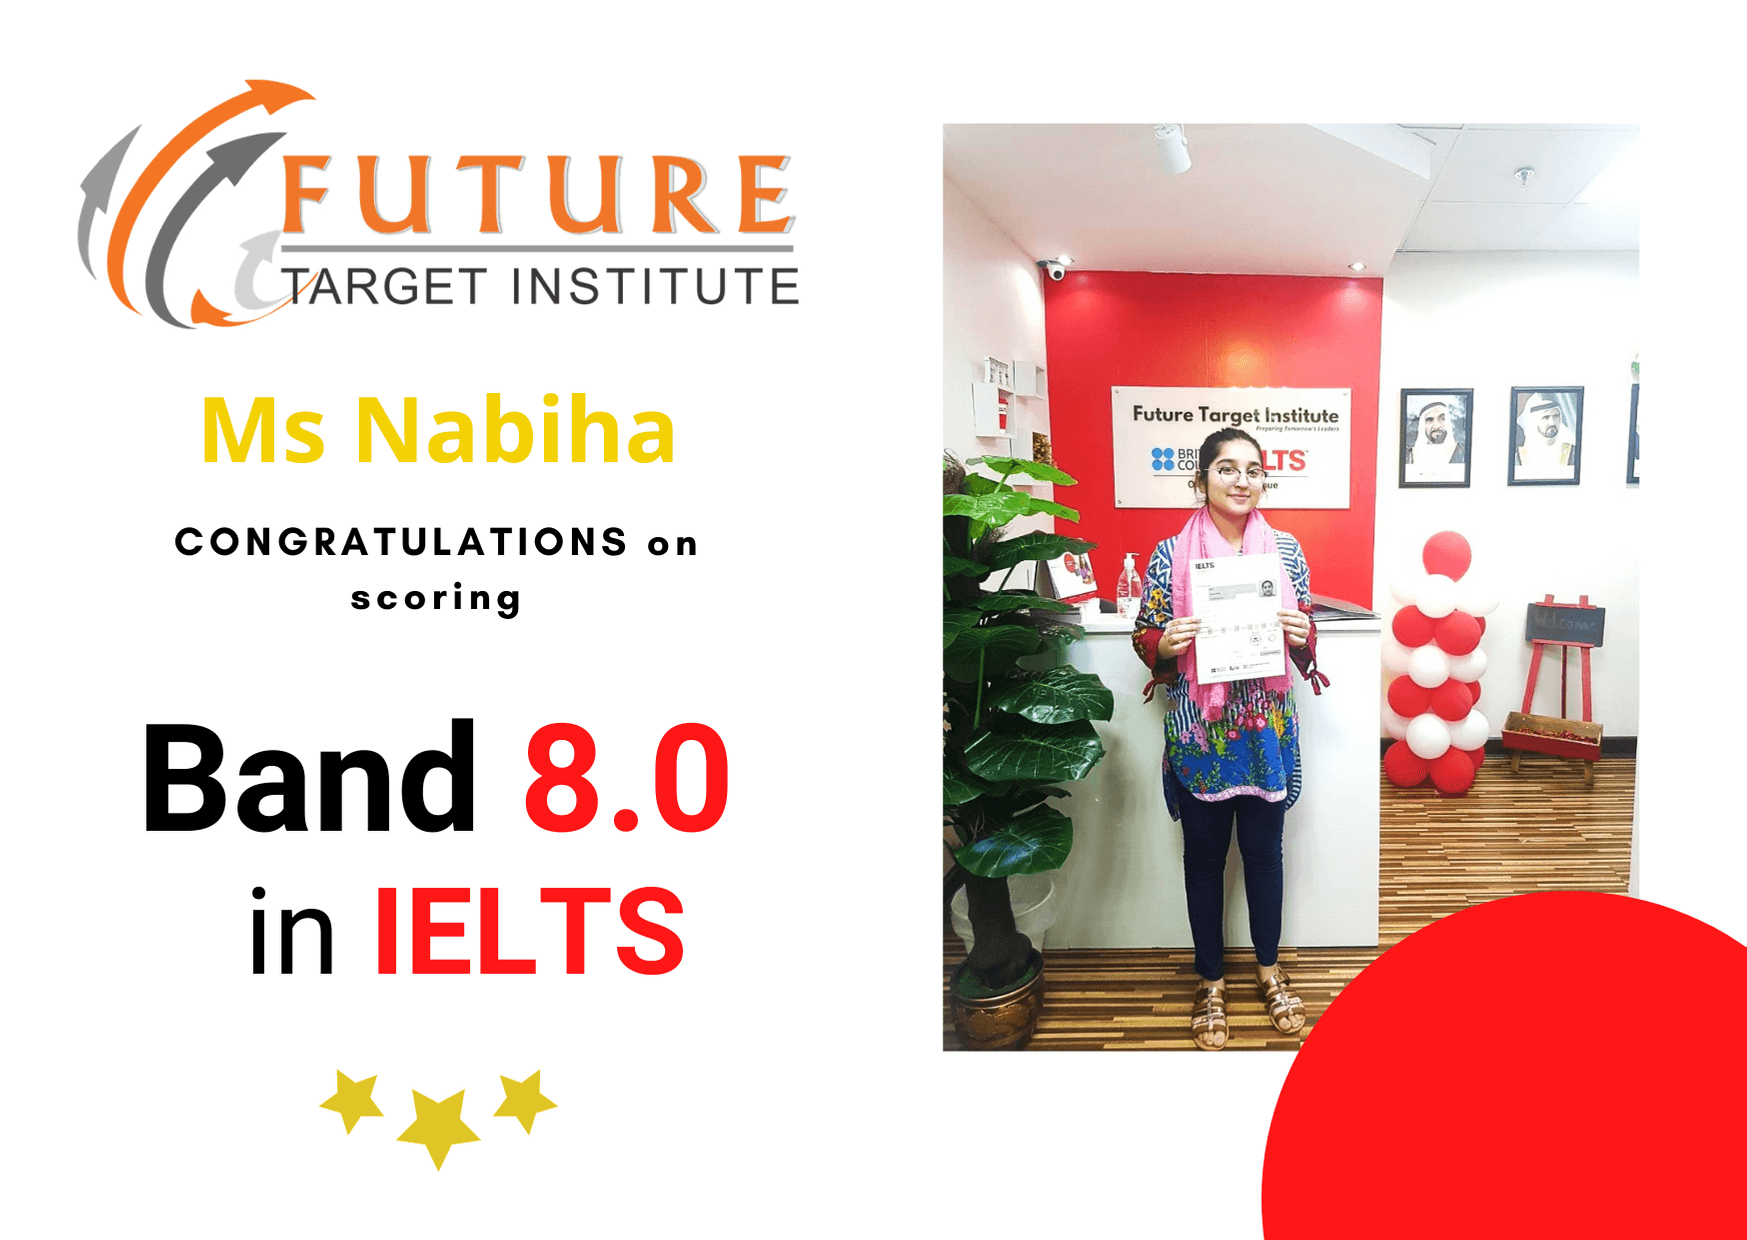 How to prepare for IELTS like Ms Divya who scored Band 8 by preparing with FTI's ielts listening practice test.
